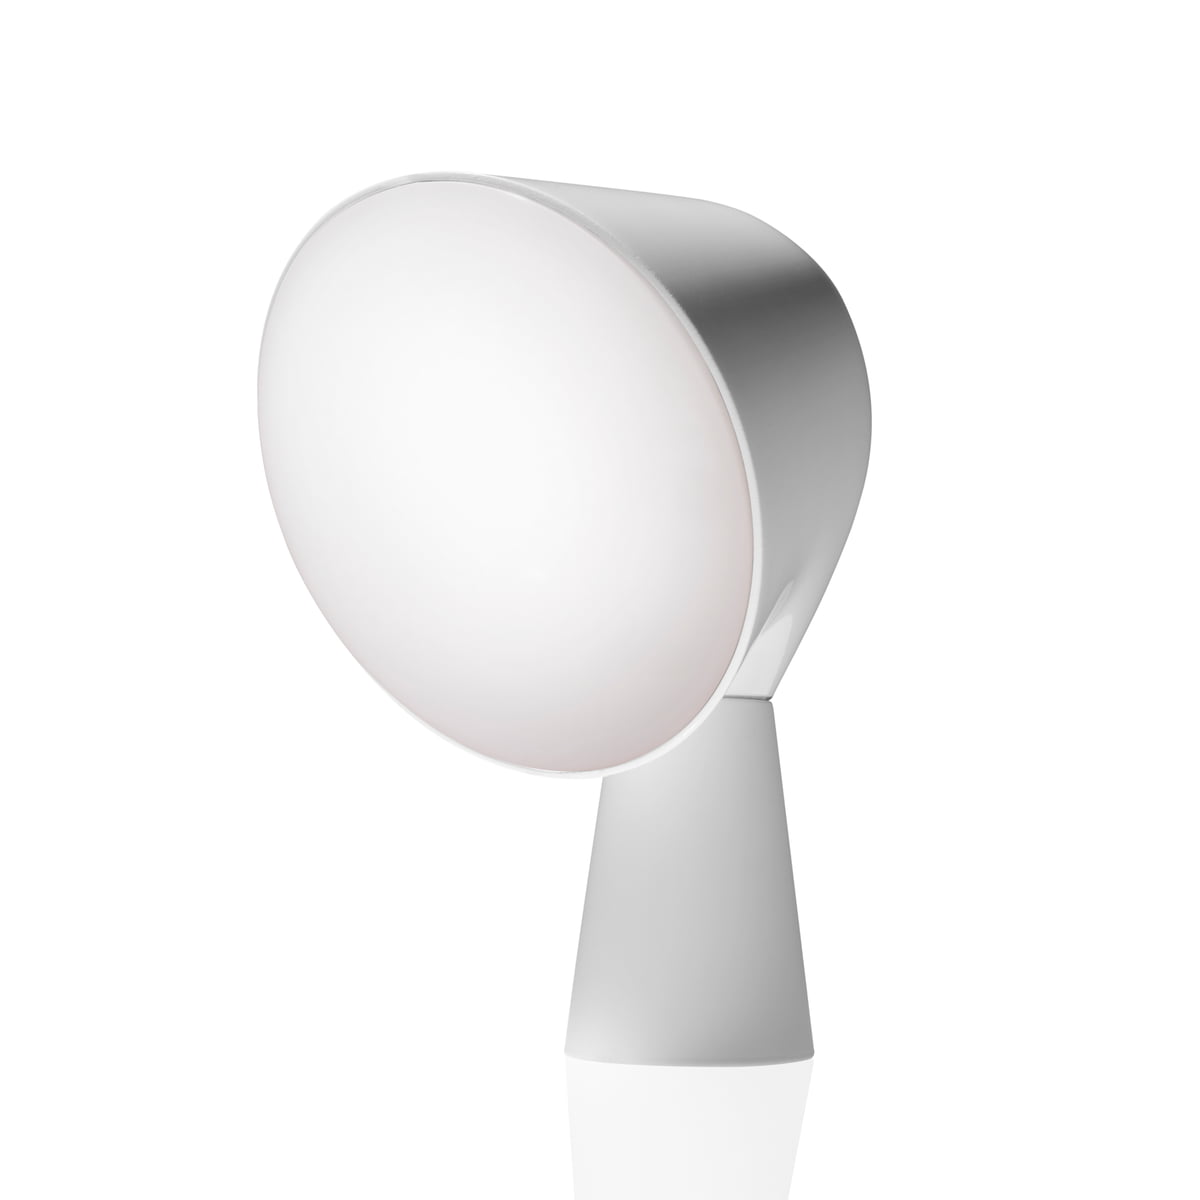 voldsom Normalisering Omhyggelig læsning Binic table lamp by Foscarini